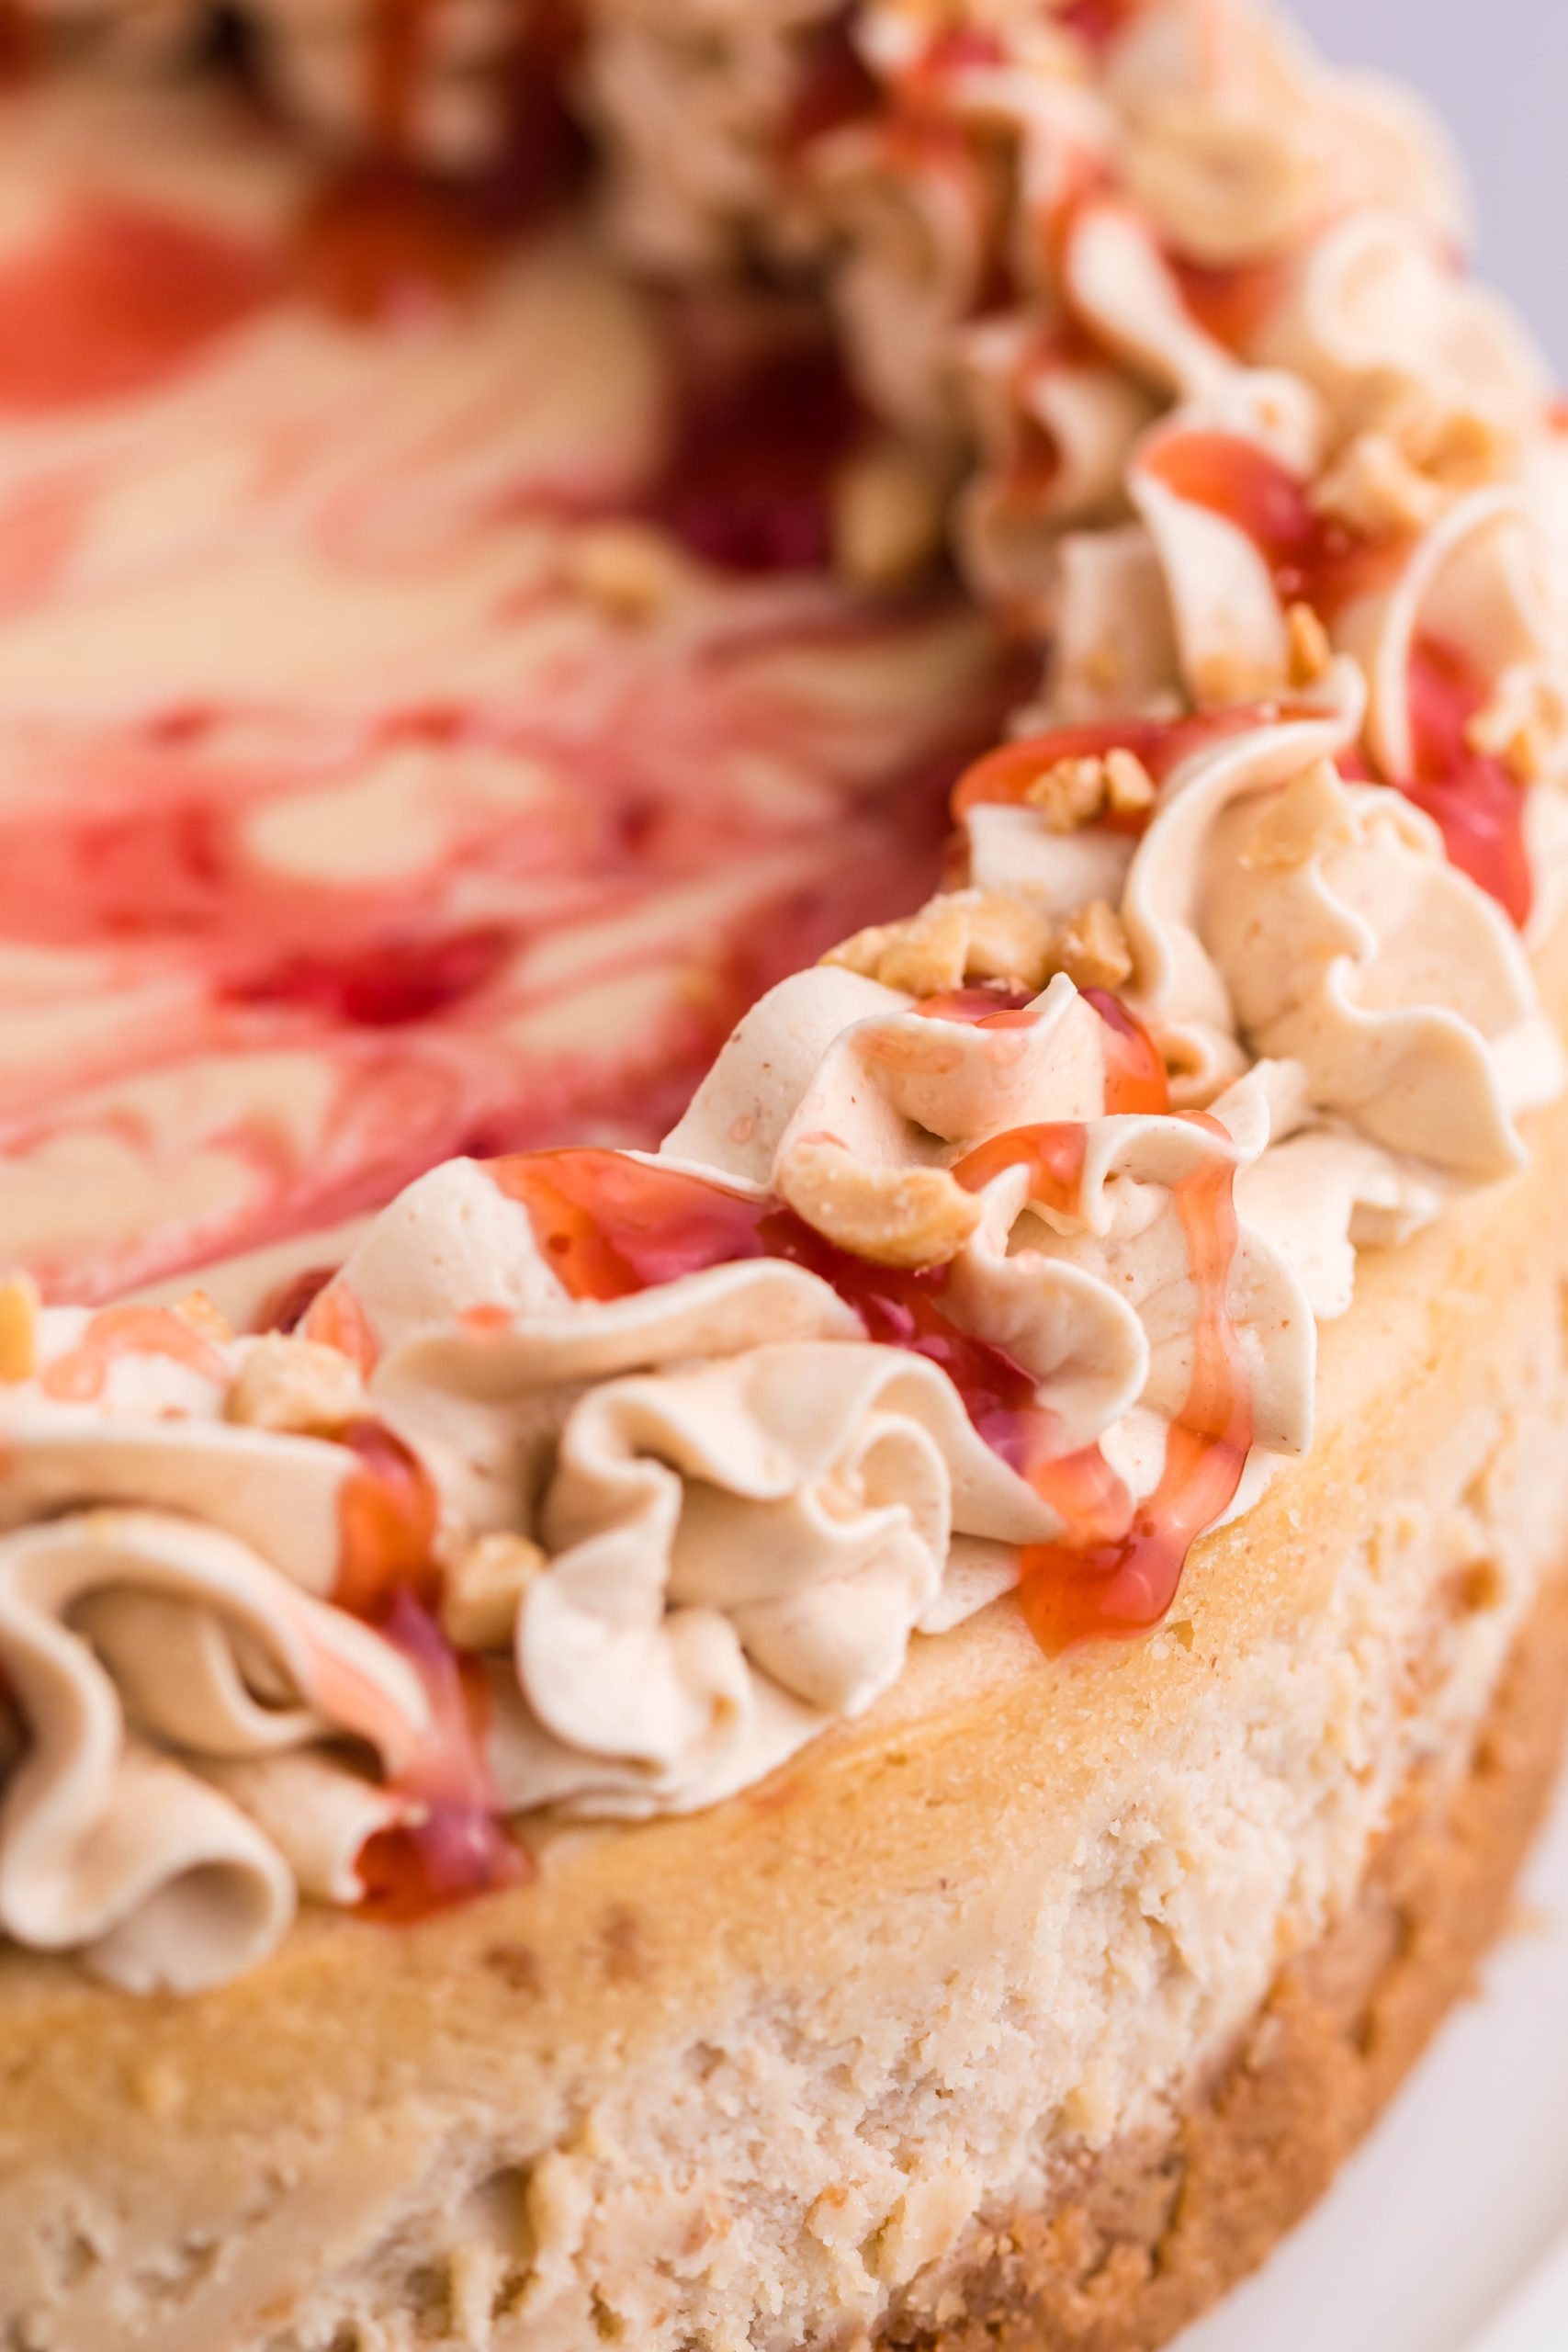 a close up shot of peanut butter & jelly cheesecake focusing on the peanut butter whipped cream piping and jelly drizzle